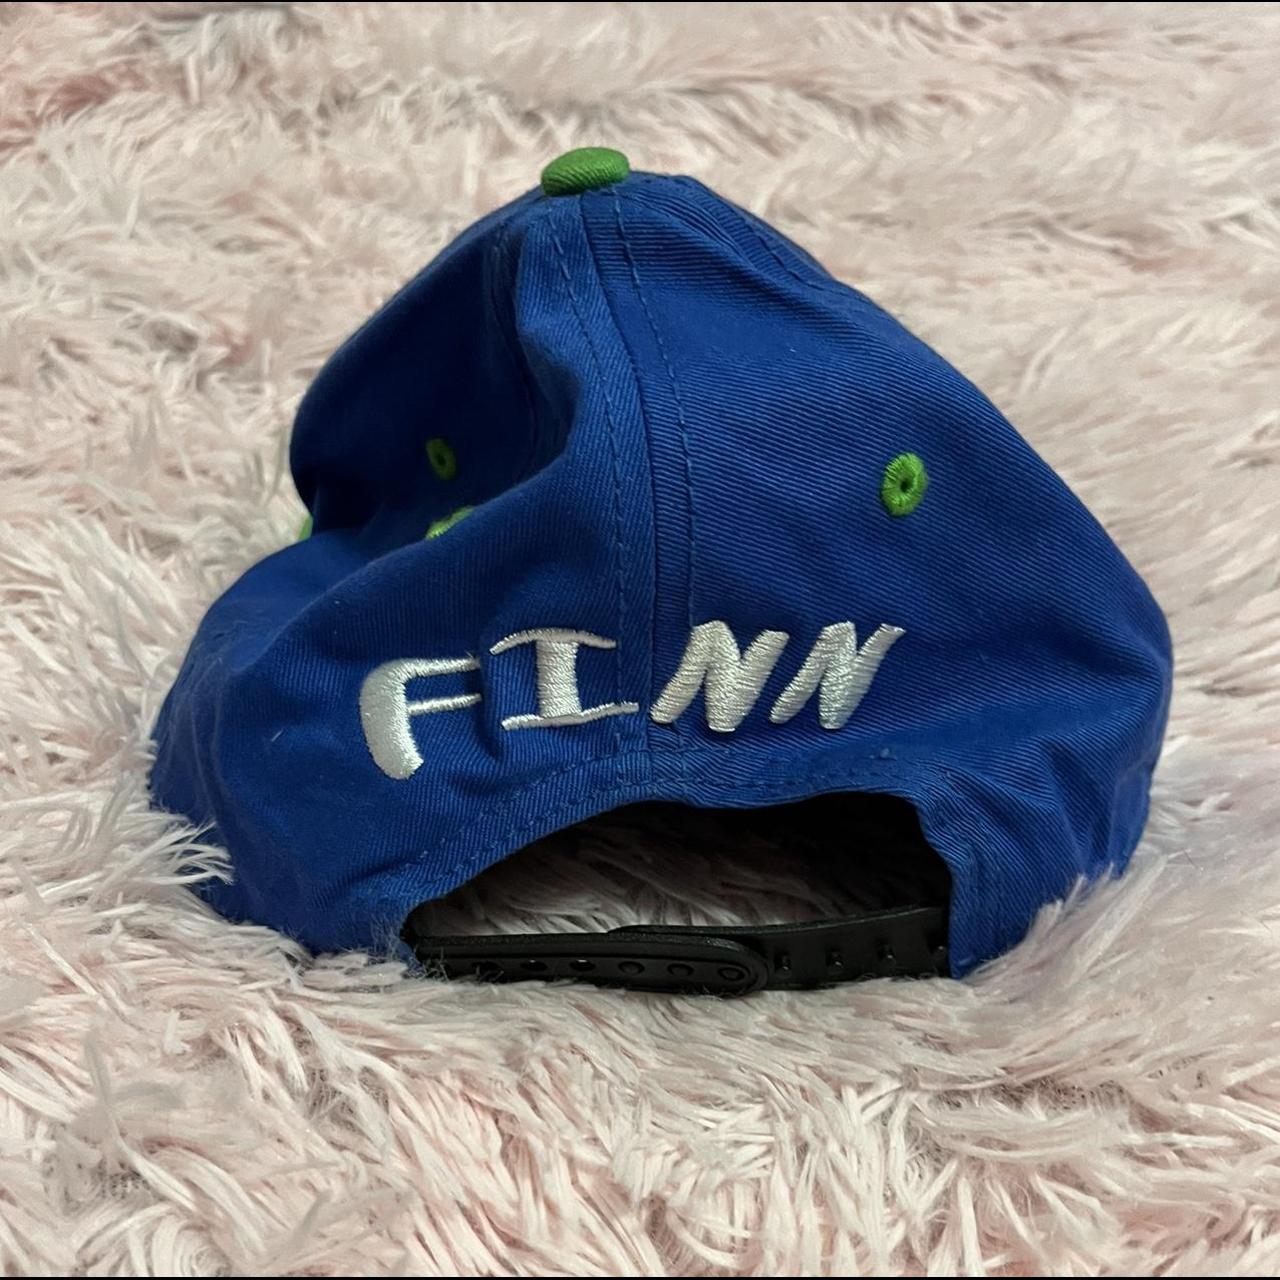 Product Image 2 - Adventure time finn hat

#2000s #hottopic